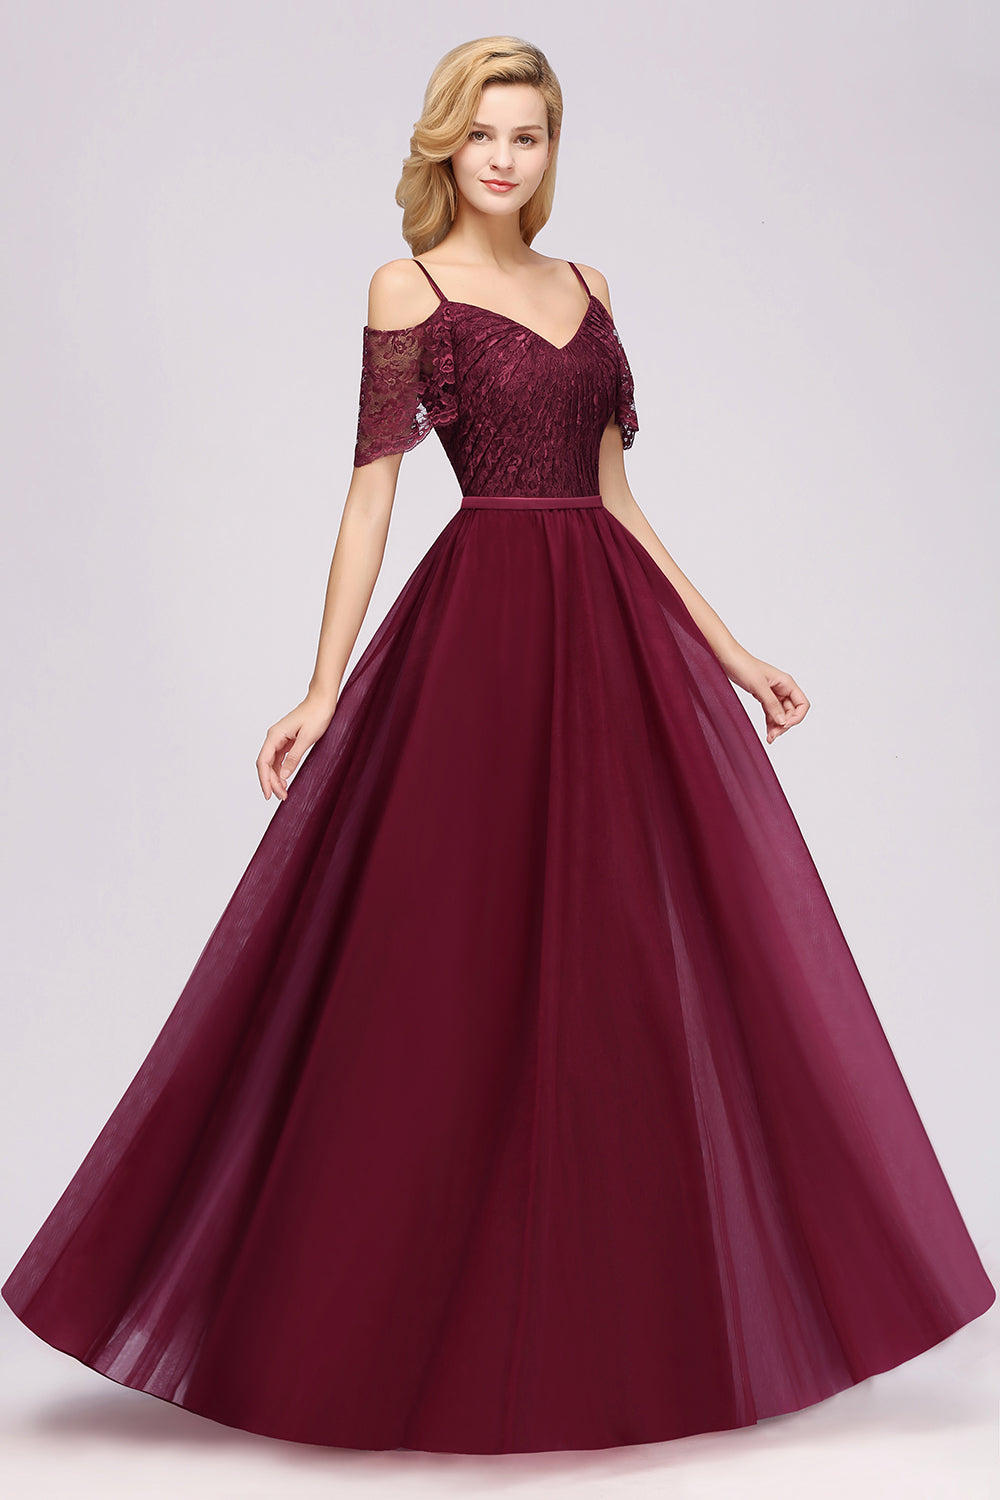 Affordable Chiffon Off-the-Shoulder Burgundy Lace Bridesmaid Dresses